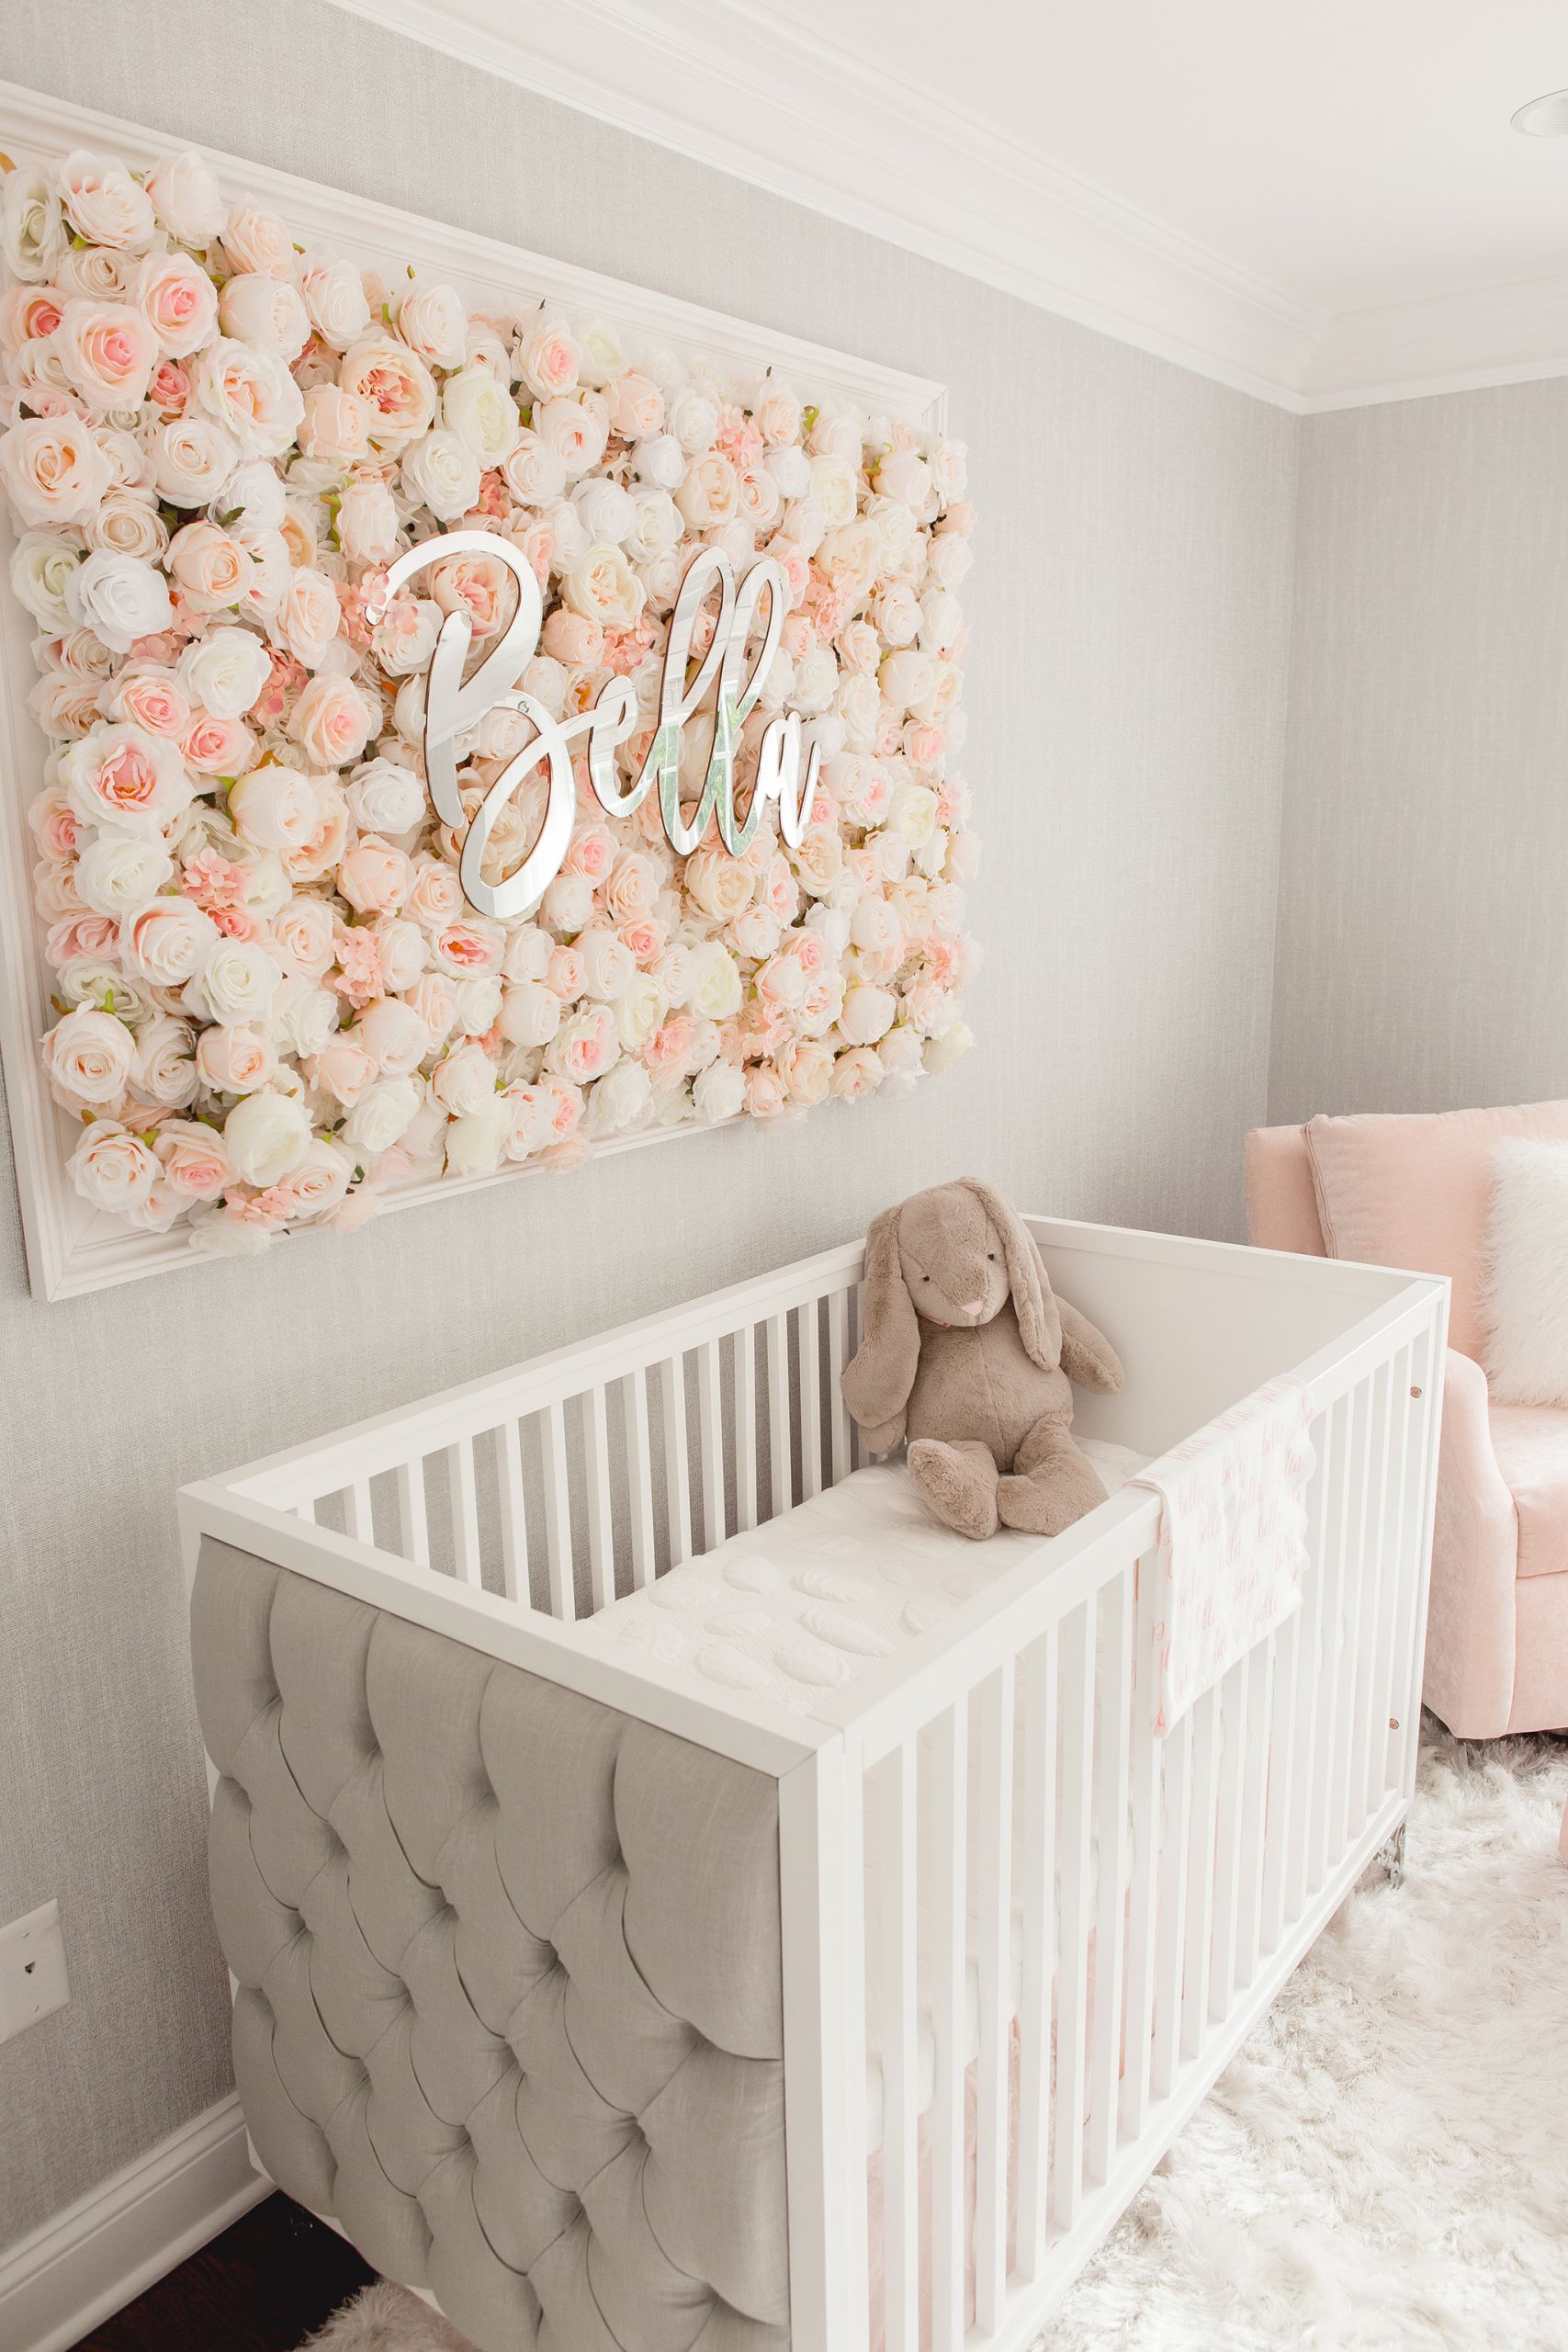 Baby Decor For Nursery
 Guess Which Celebrity Nursery Inspired this Gorgeous Space